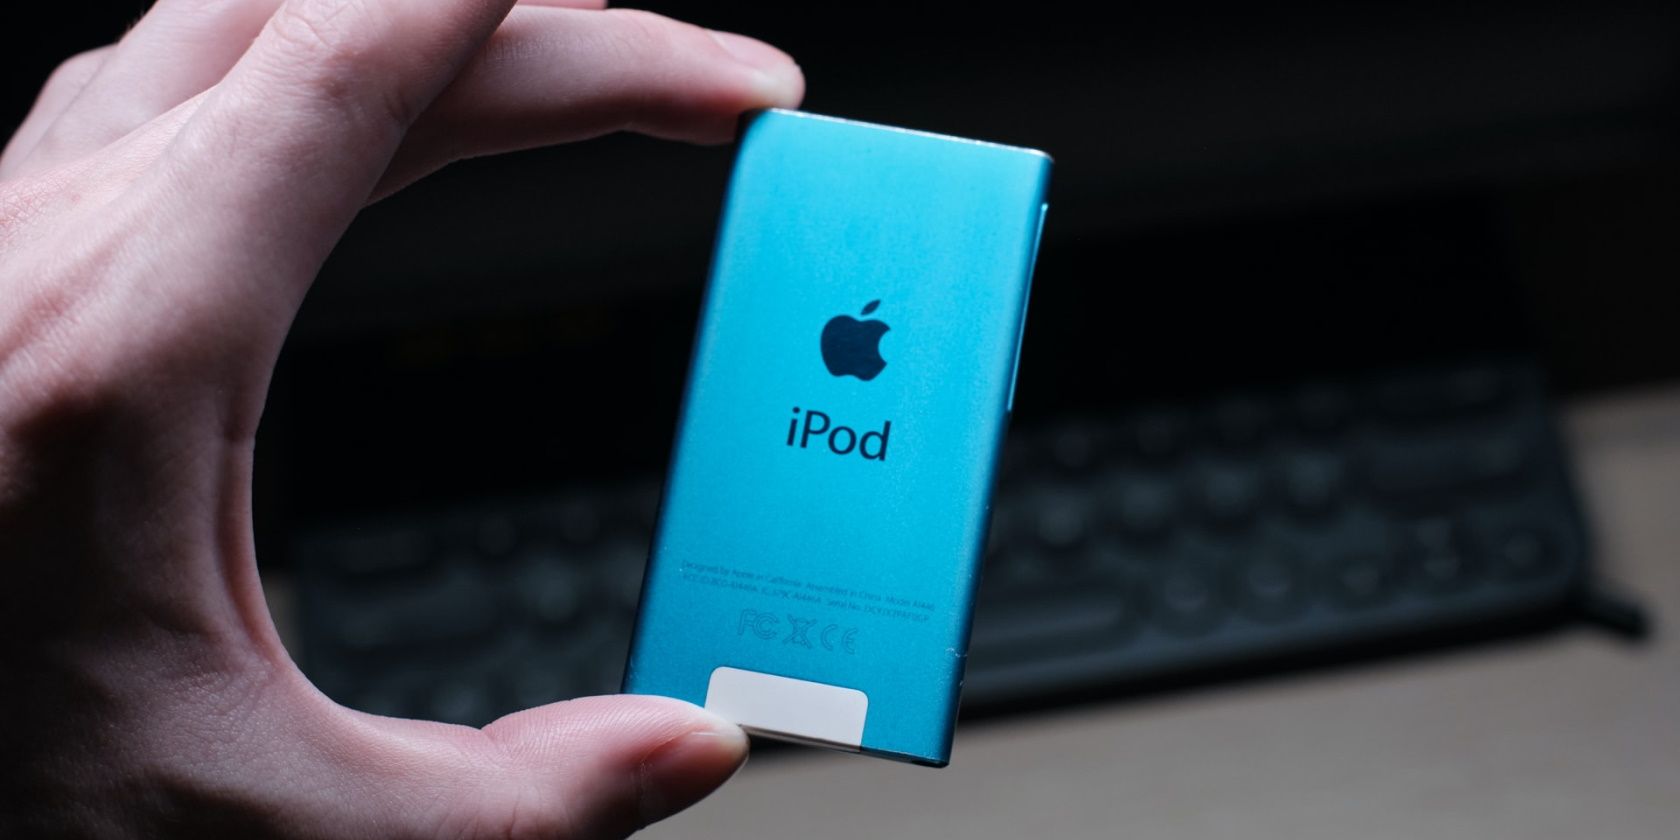 Explained: Why Apple discontinued iPod, and what next for its